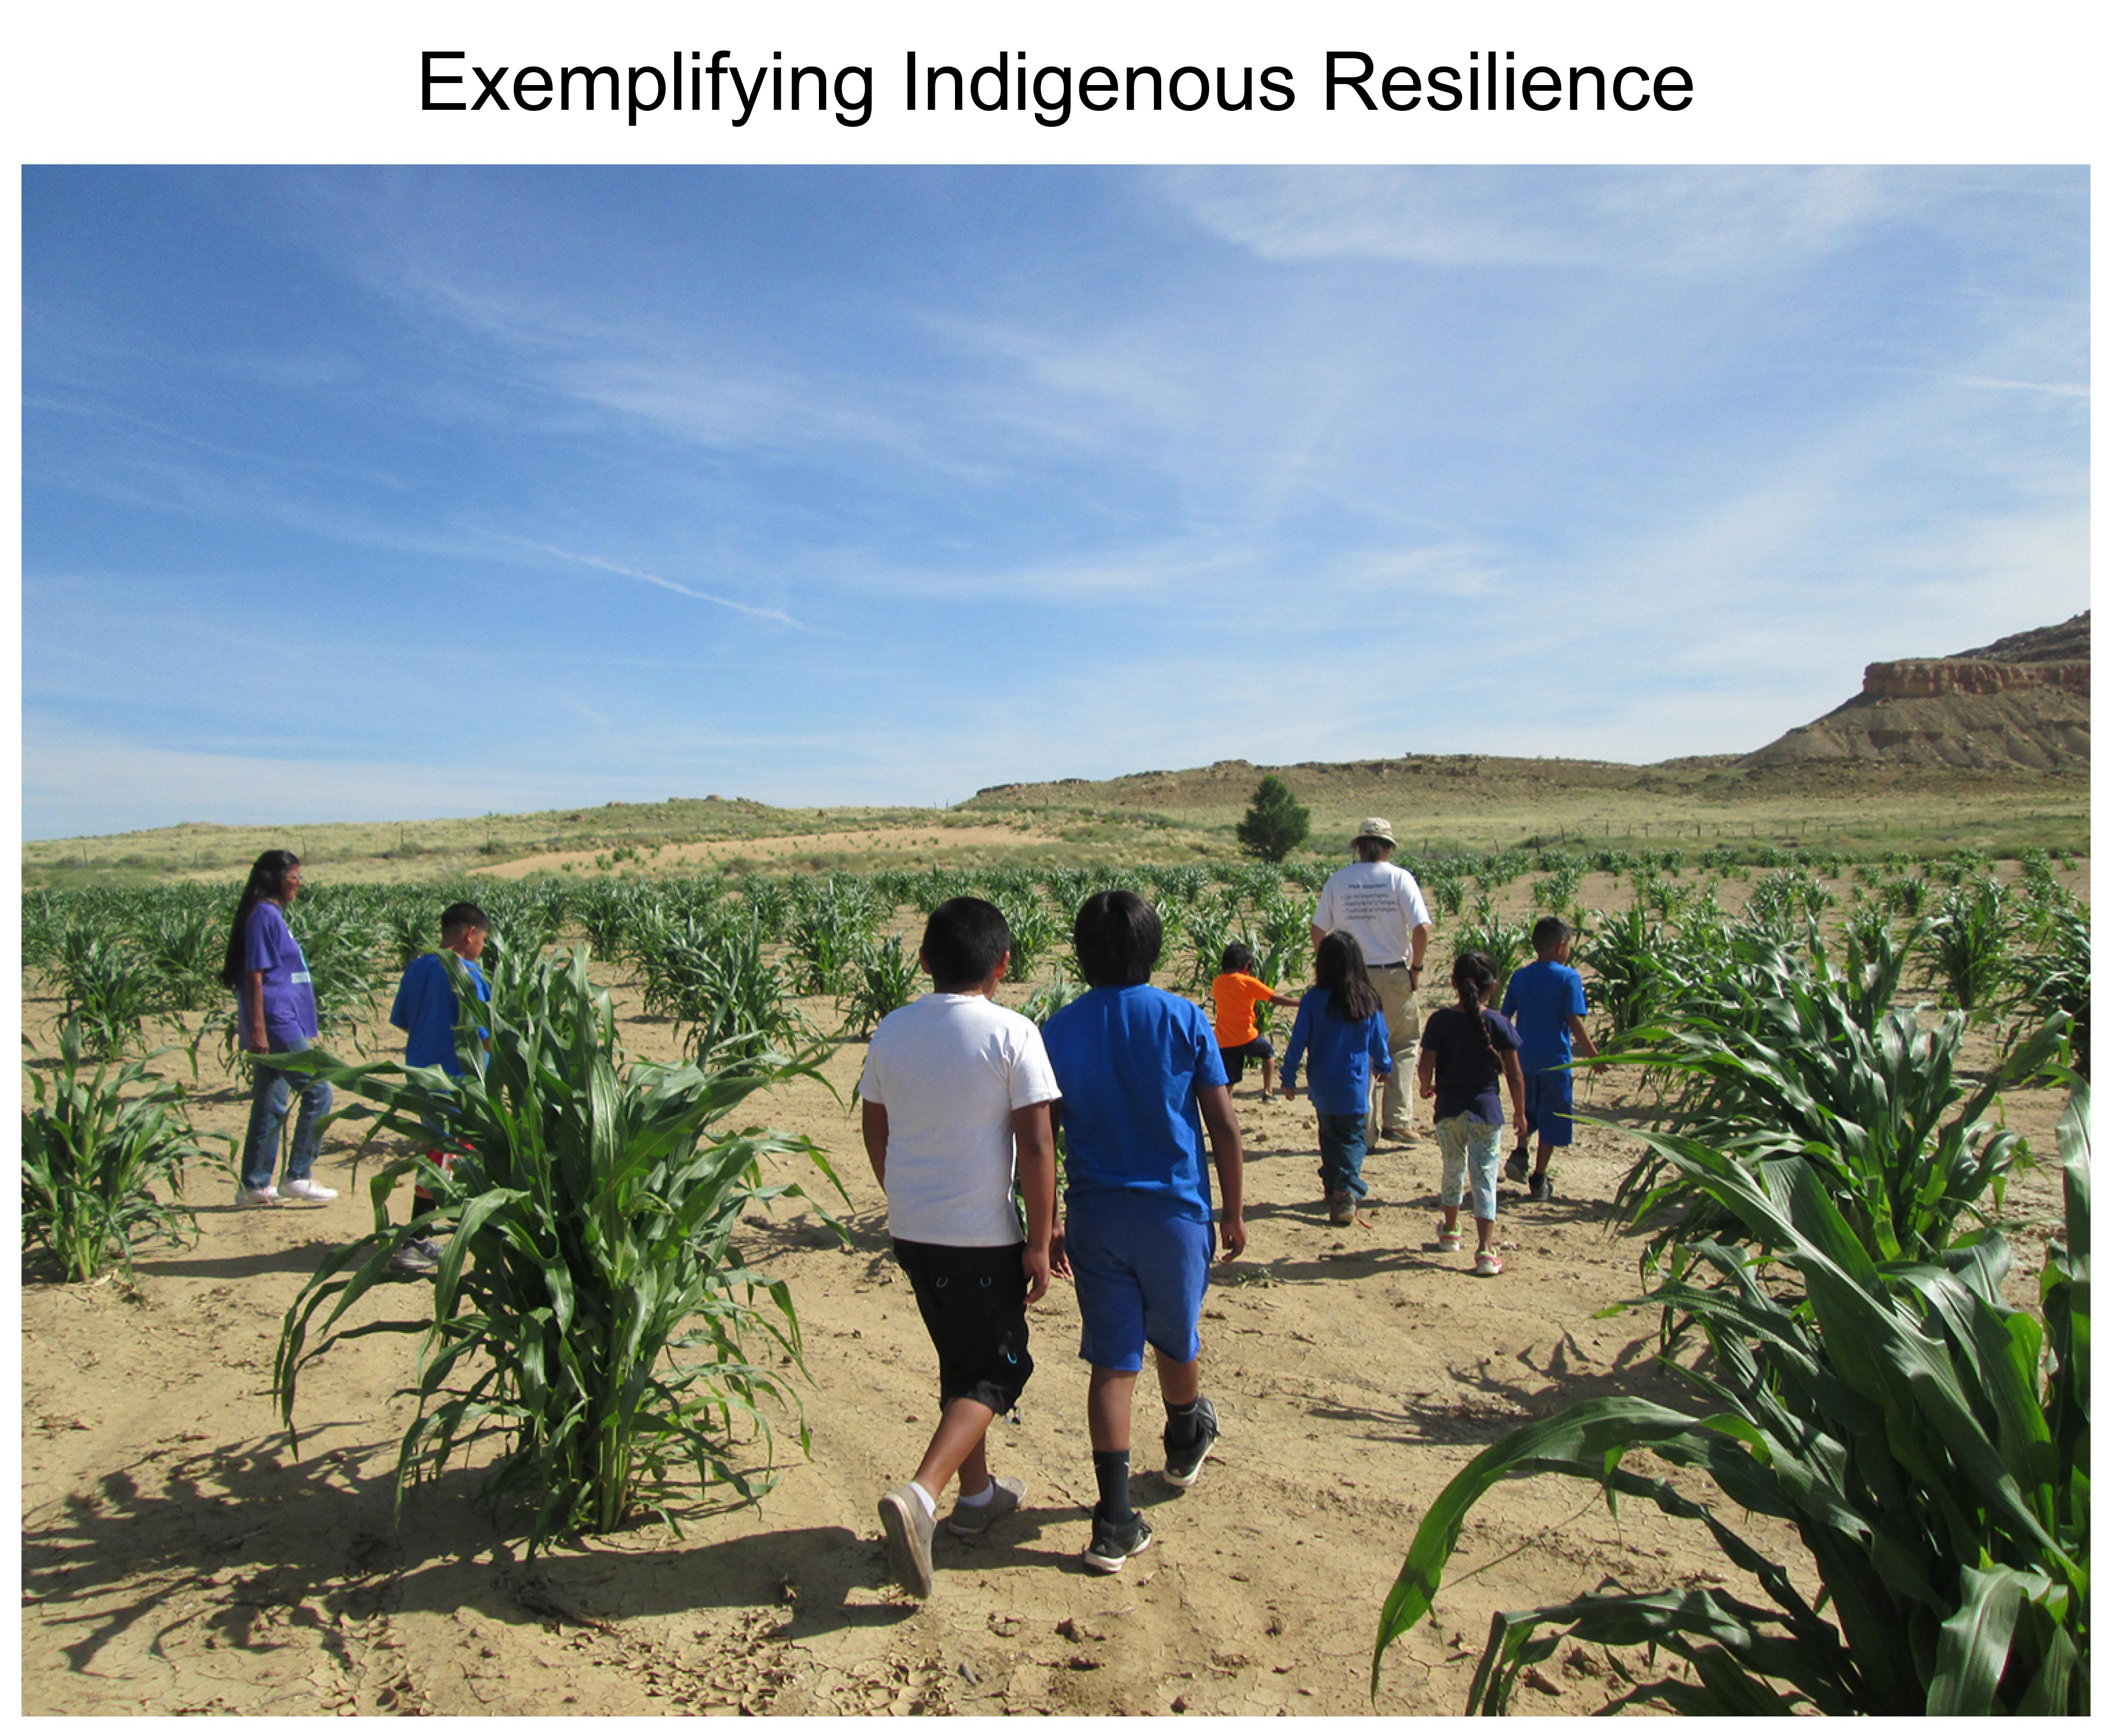 Exemplifying Indigenous Resilience